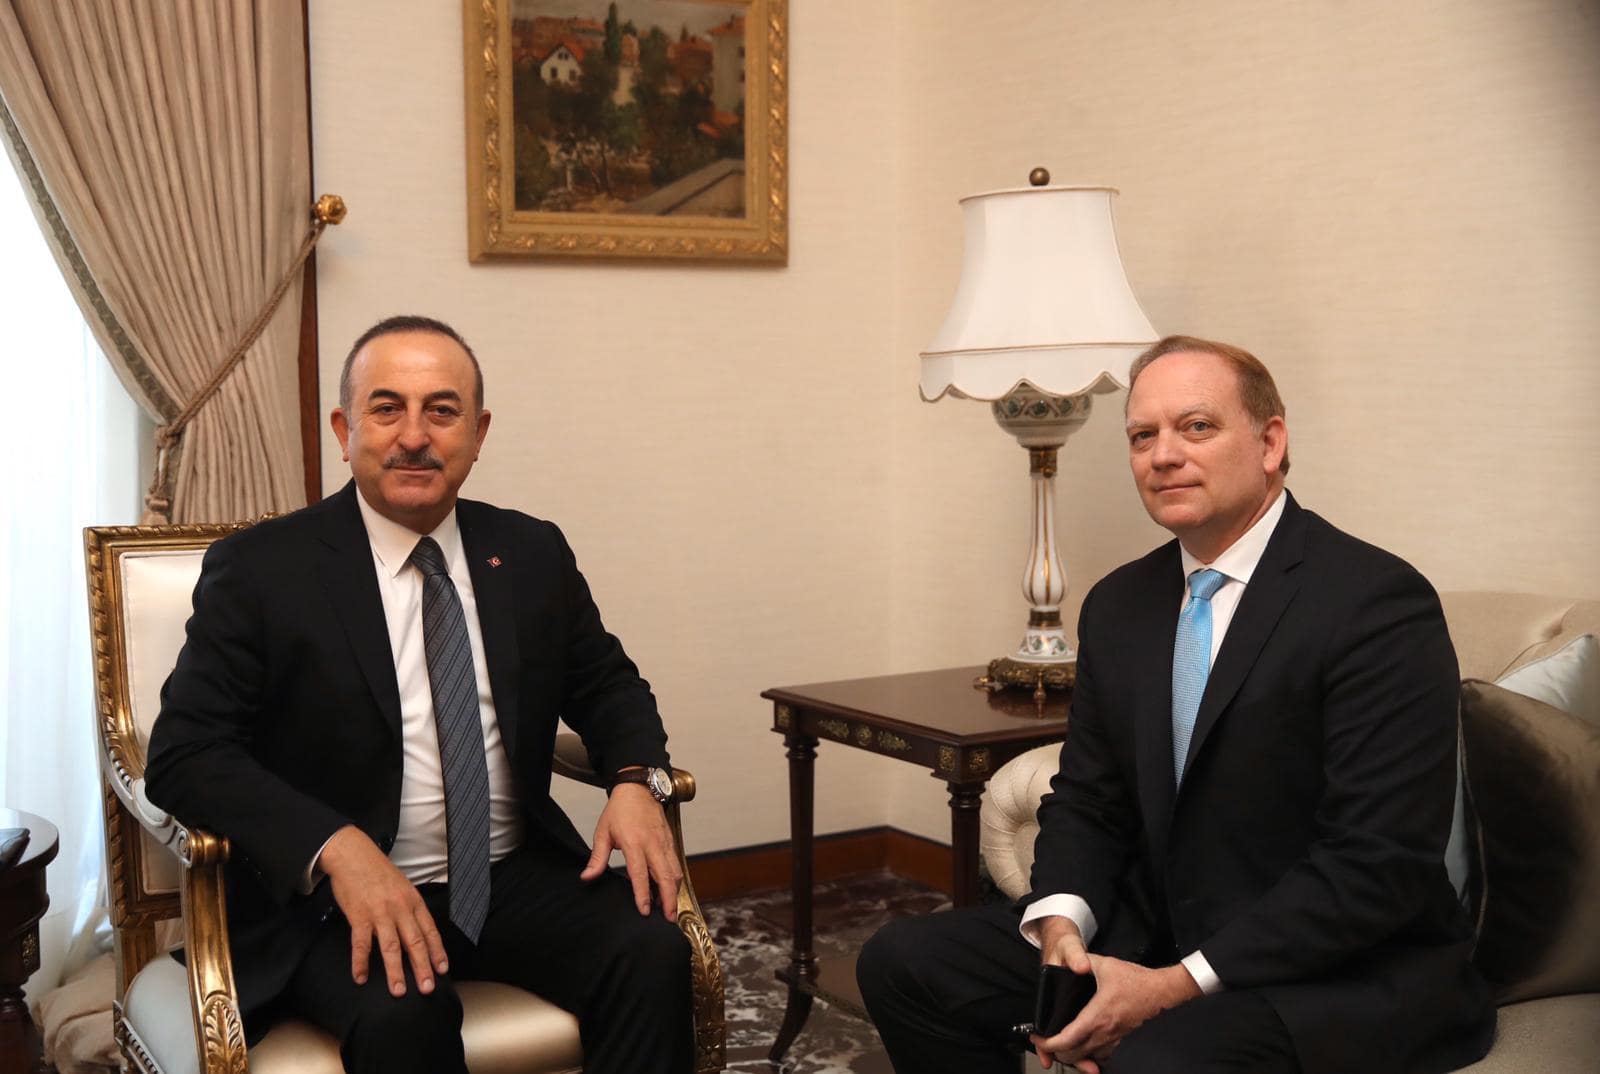 Turkish Minister of Foreign Affairs, Mevlüt Çavuşoğlu, and Dr. Parker meet in Ankara to discuss NATO security issues.